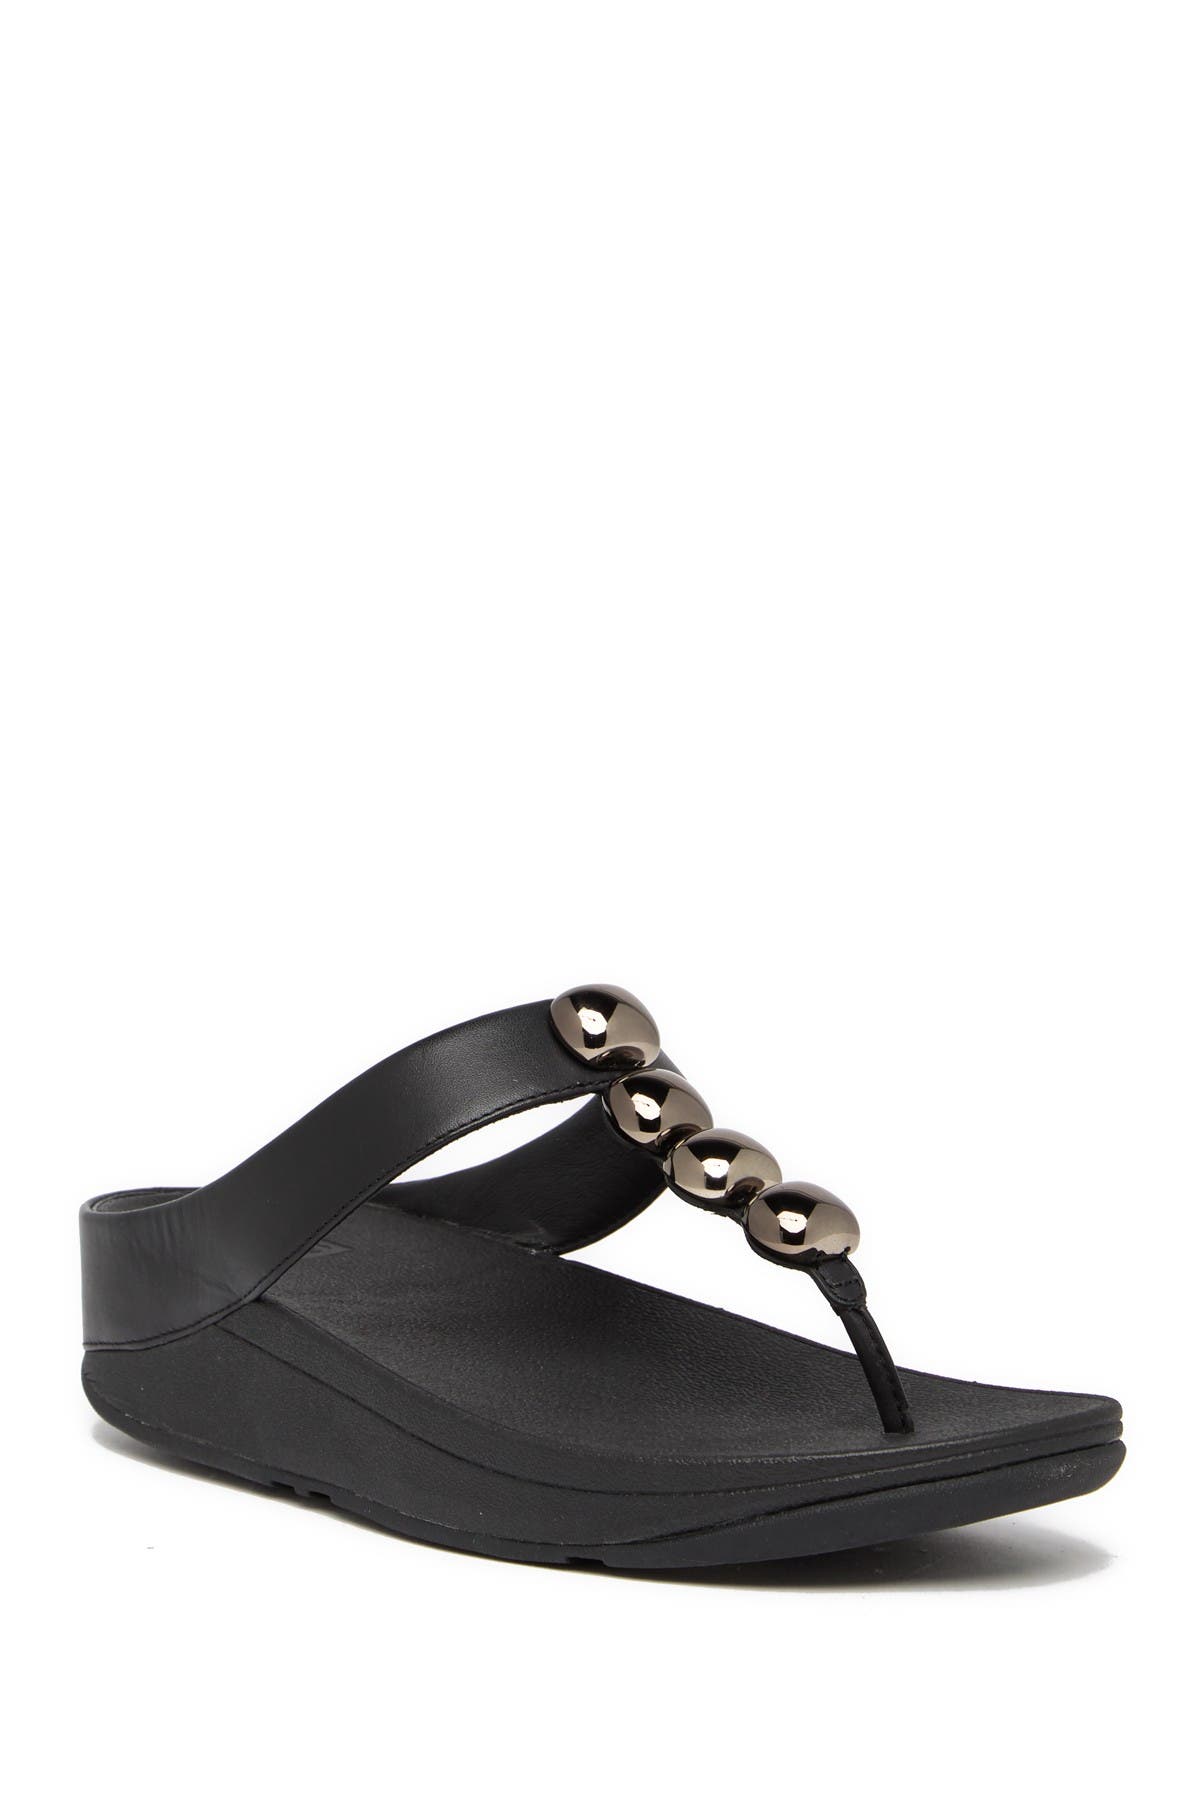 central online fitflop